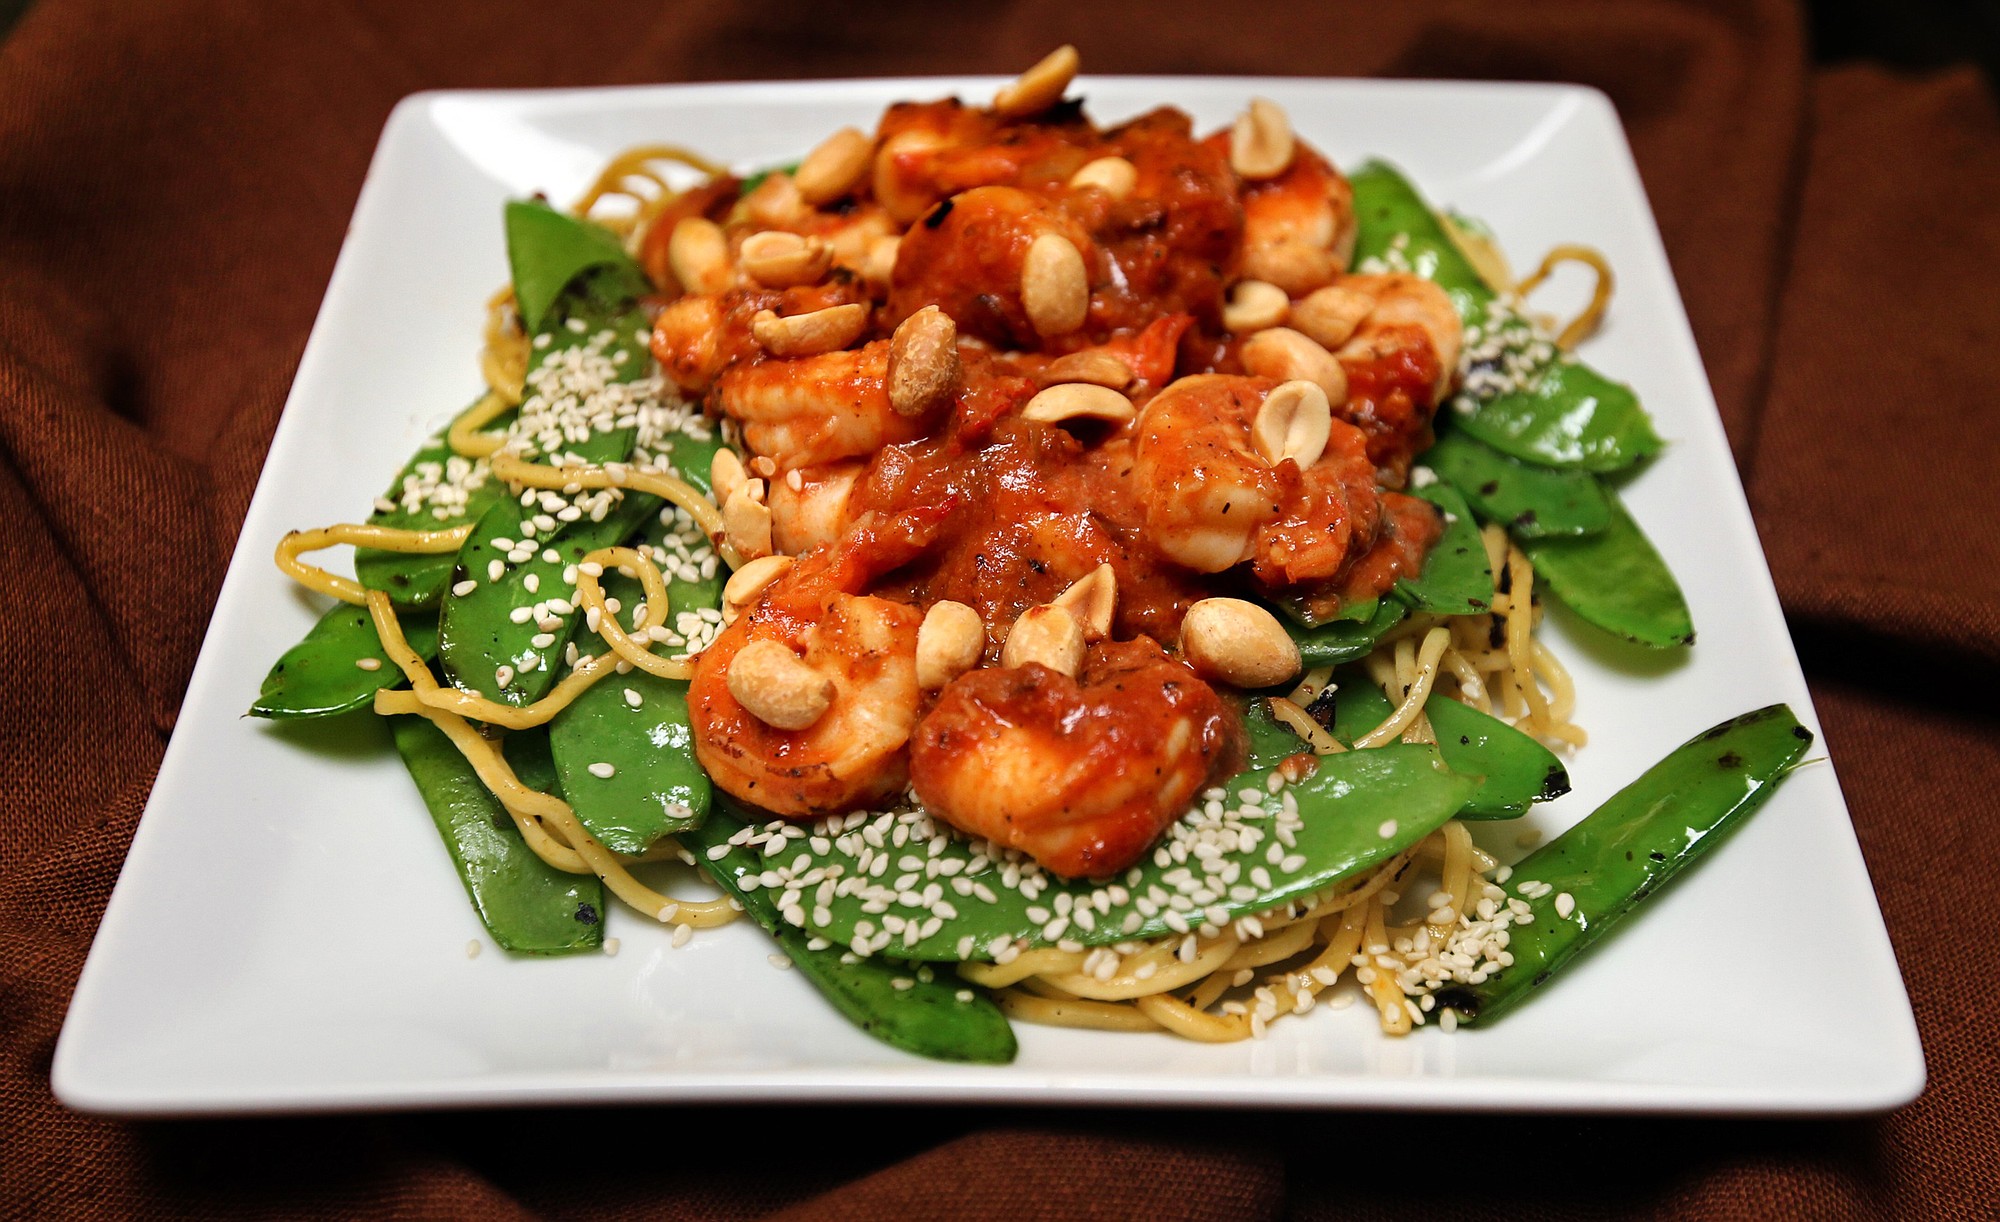 Stir-fried shrimp are served with snow peas and sesame noodles for a spicy dinner that's fast and easy.